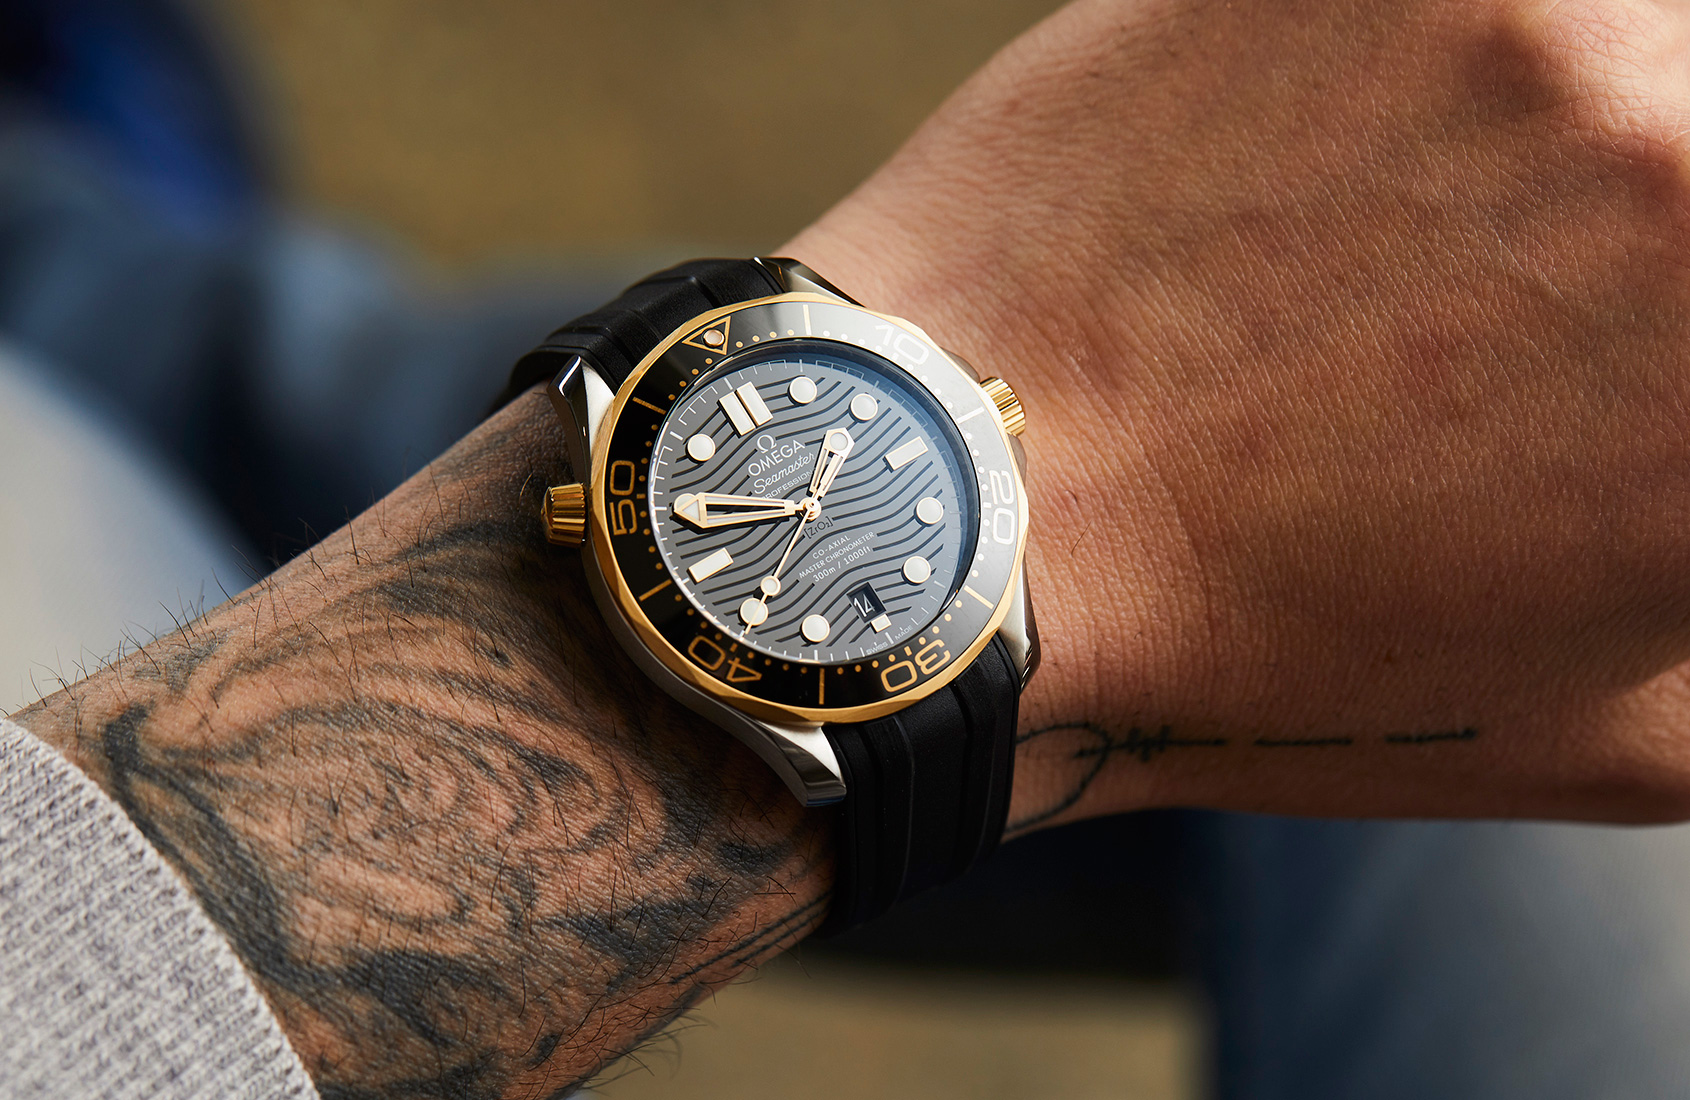 omega black and gold watch